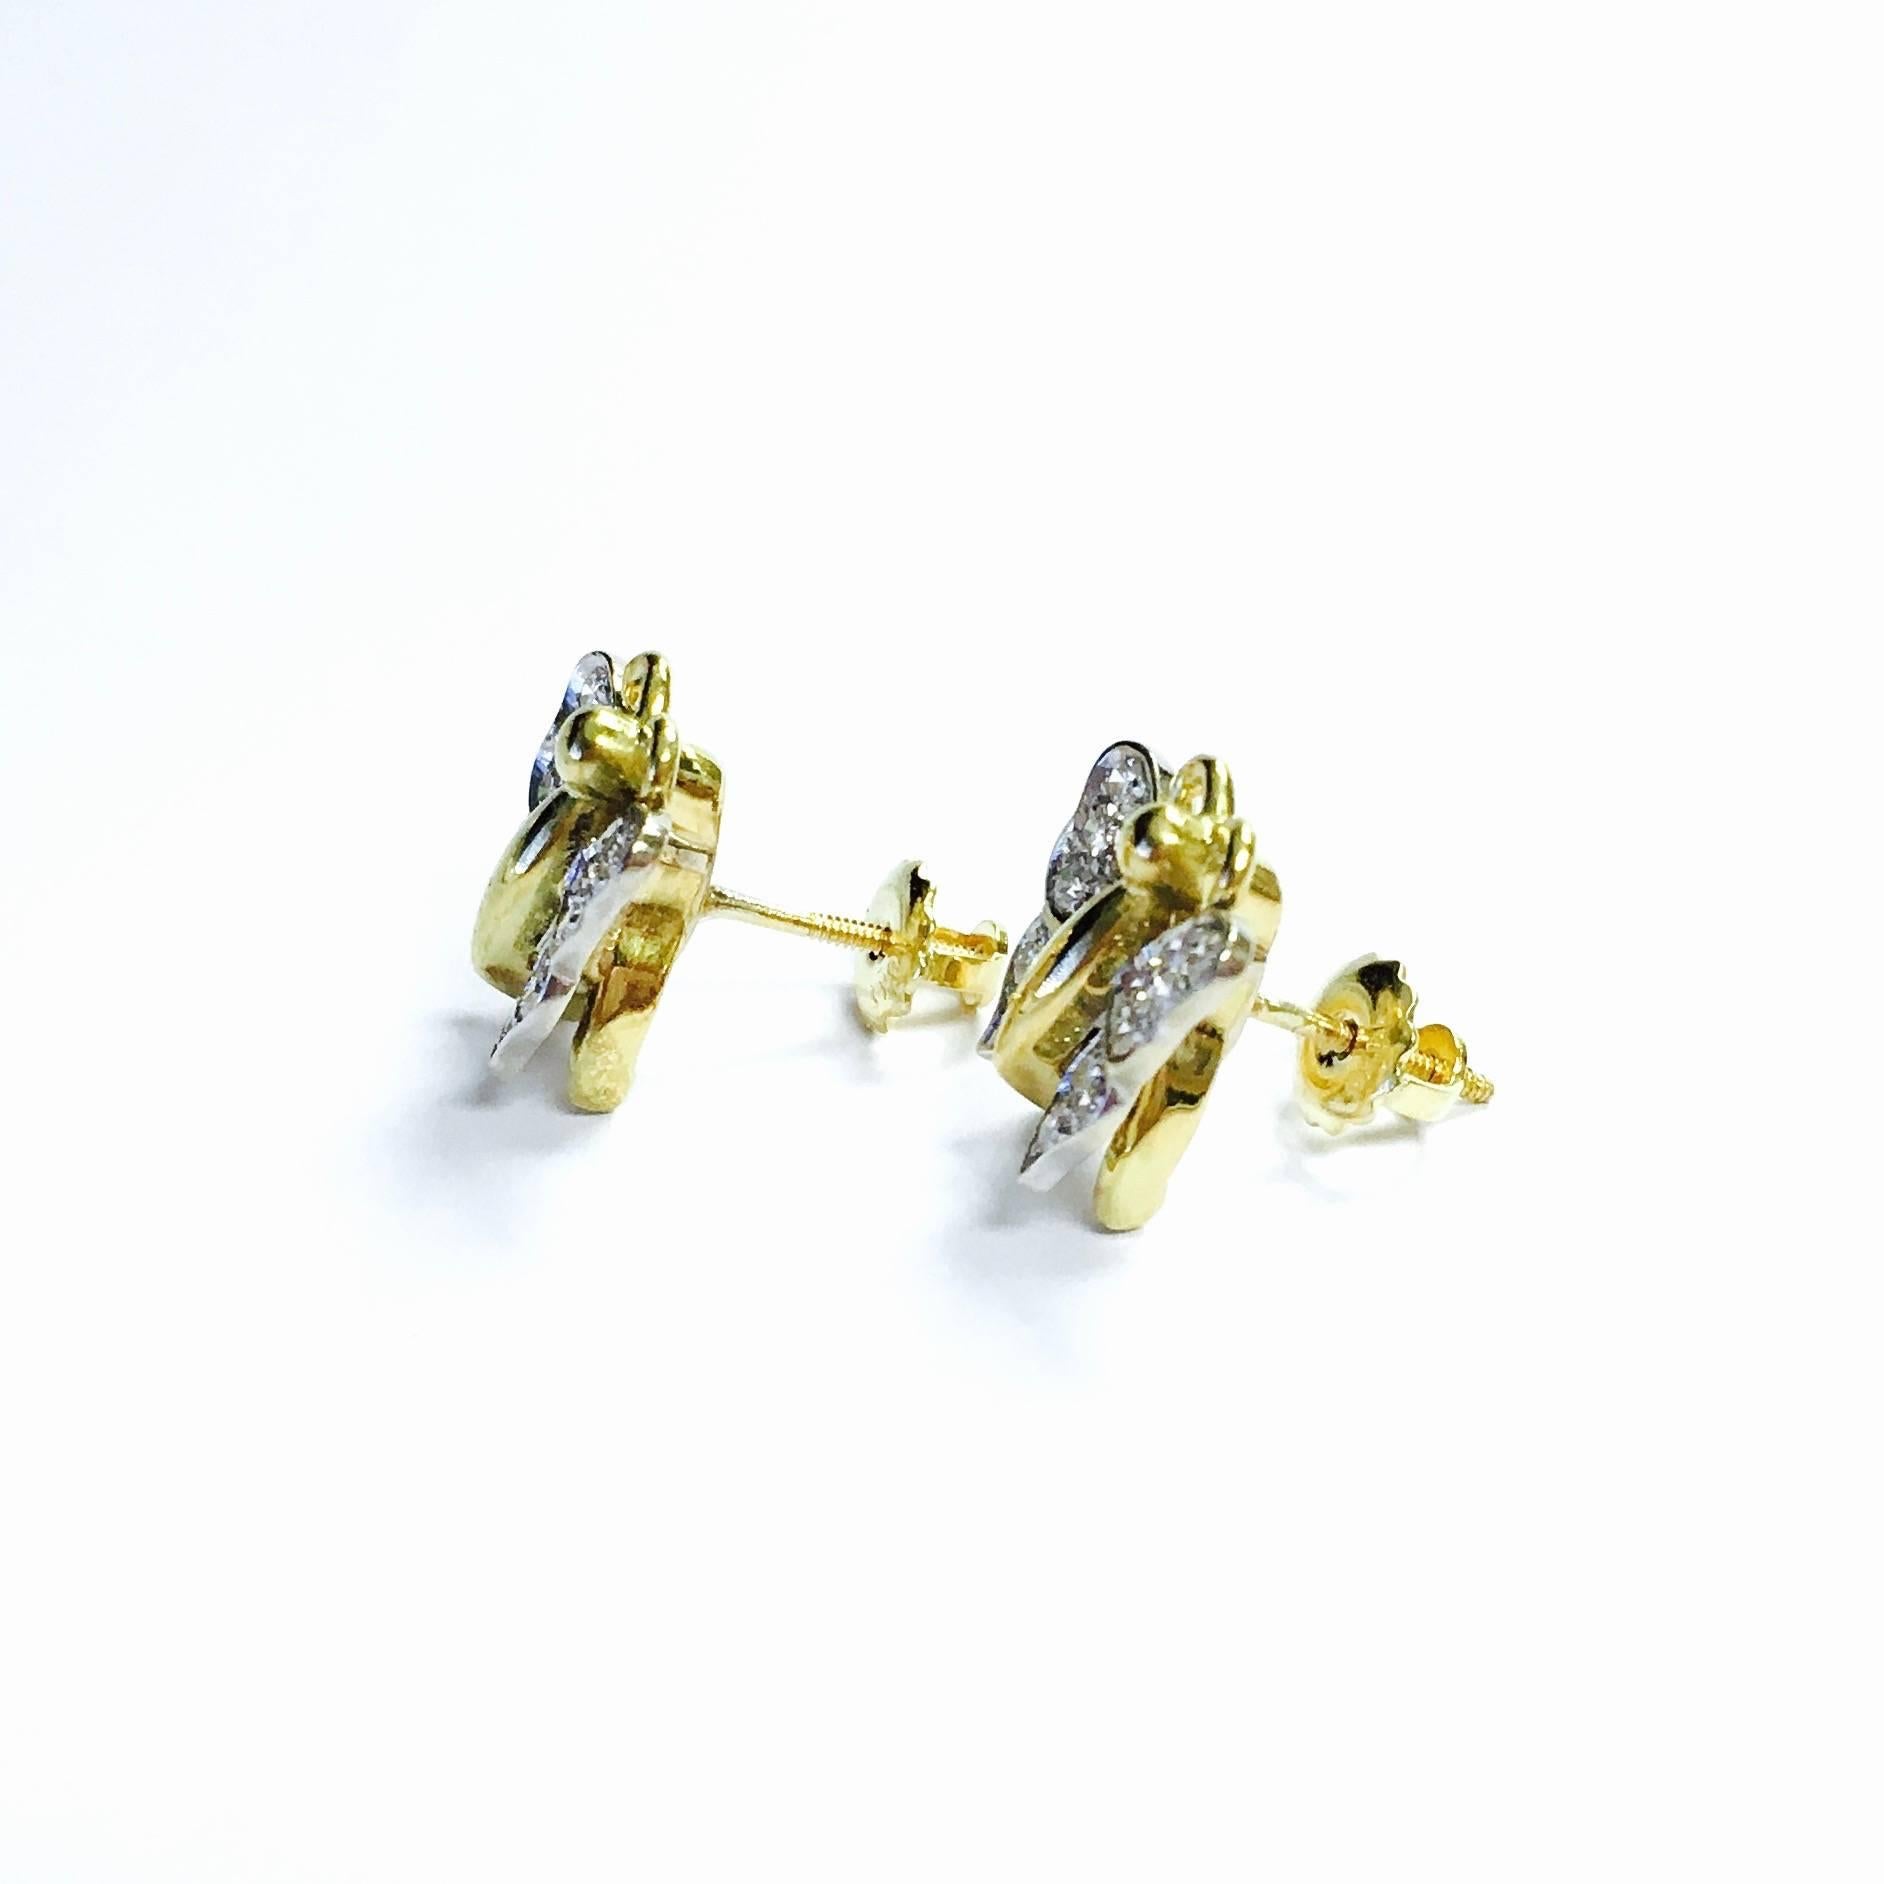 Gorgeous butterfly diamond earrings, crafted in 18K white and yellow gold, set with 32 single cut diamonds. Approximate total weight: 0.35ct, Color: F-G, Clarity: VS1-VS2. Each earring measures: 13 x 13 mm ( 1/2 x 1/2 inch)
Post with screw back.